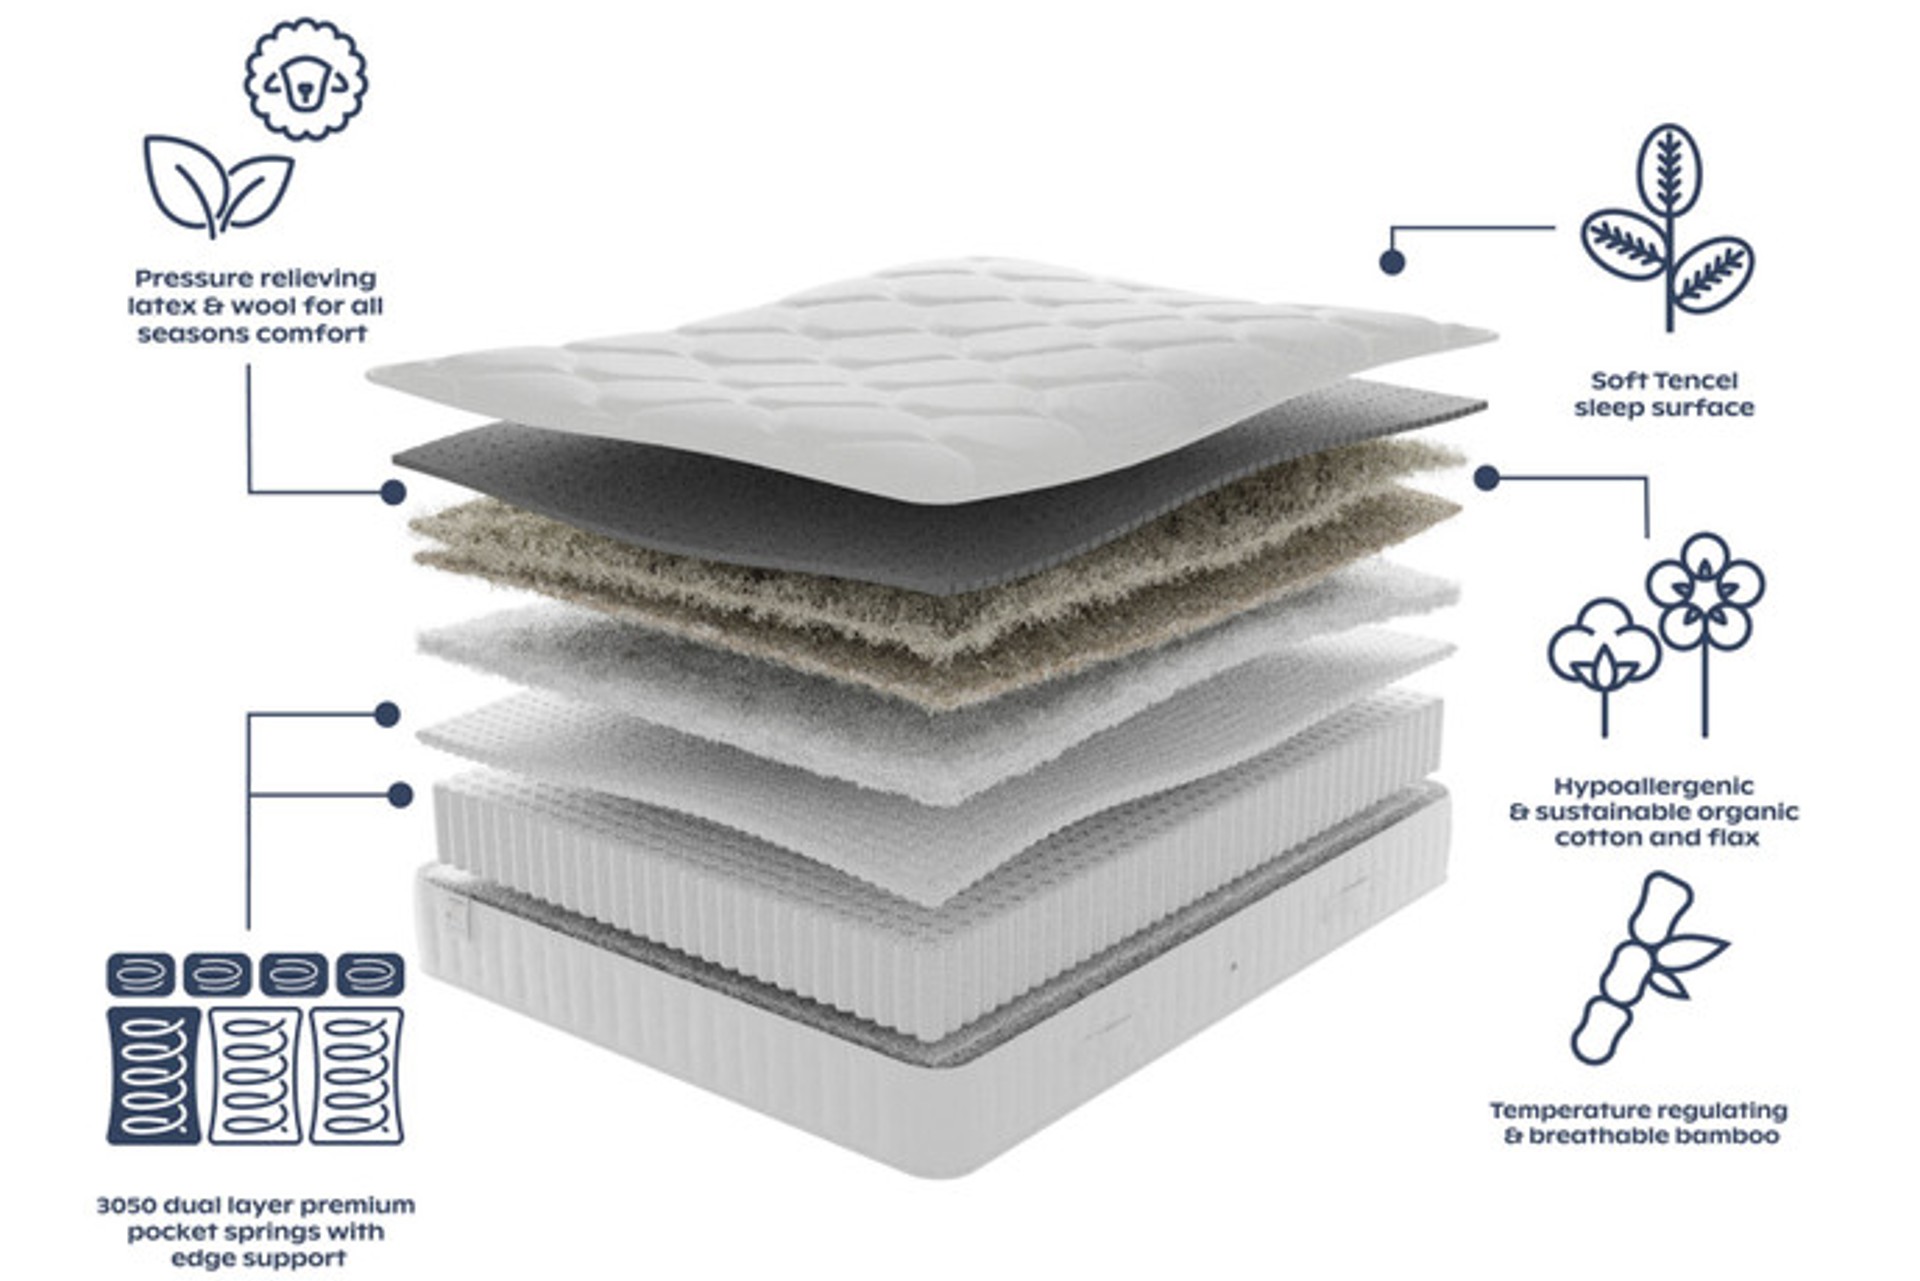 A visual breakdown of the materials used in the various layers to make the Wool Ultimate mattress